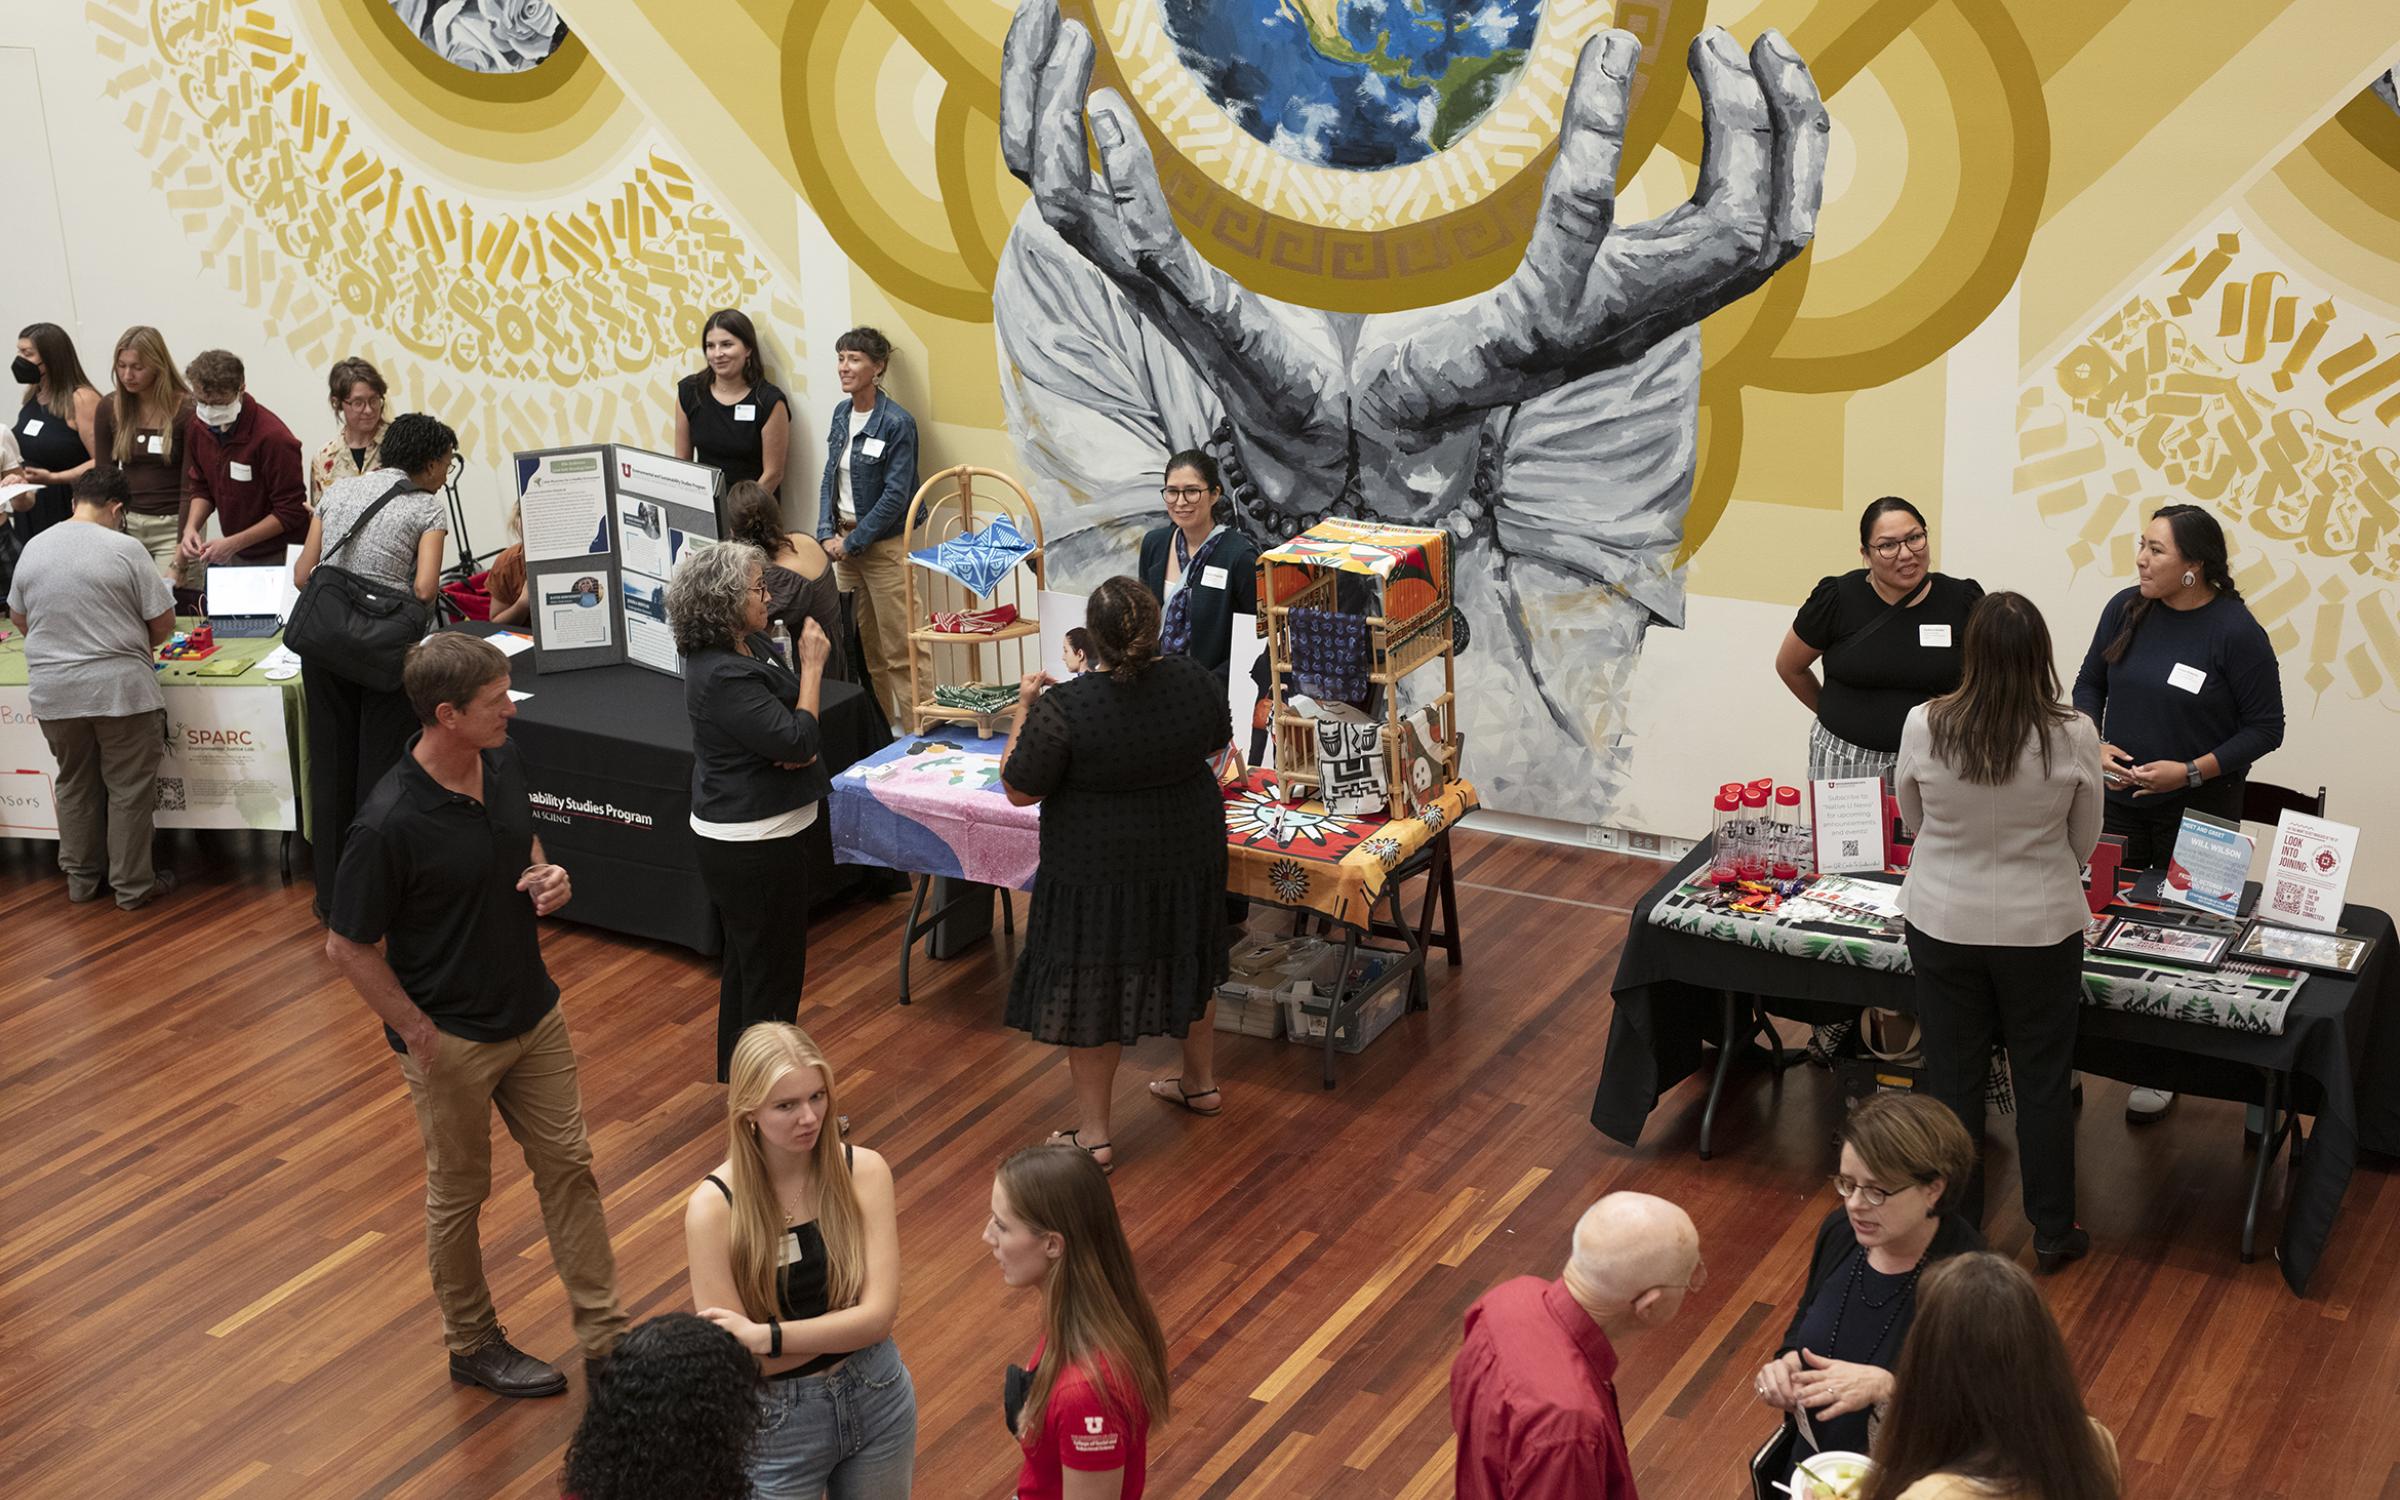 A large group of people stand around a large room, talking in small groups. There are tables near the far wall with different materials and goods that people are looking at. There is a mural in the background of two hands holding and earth in front of a golden mandala shape.